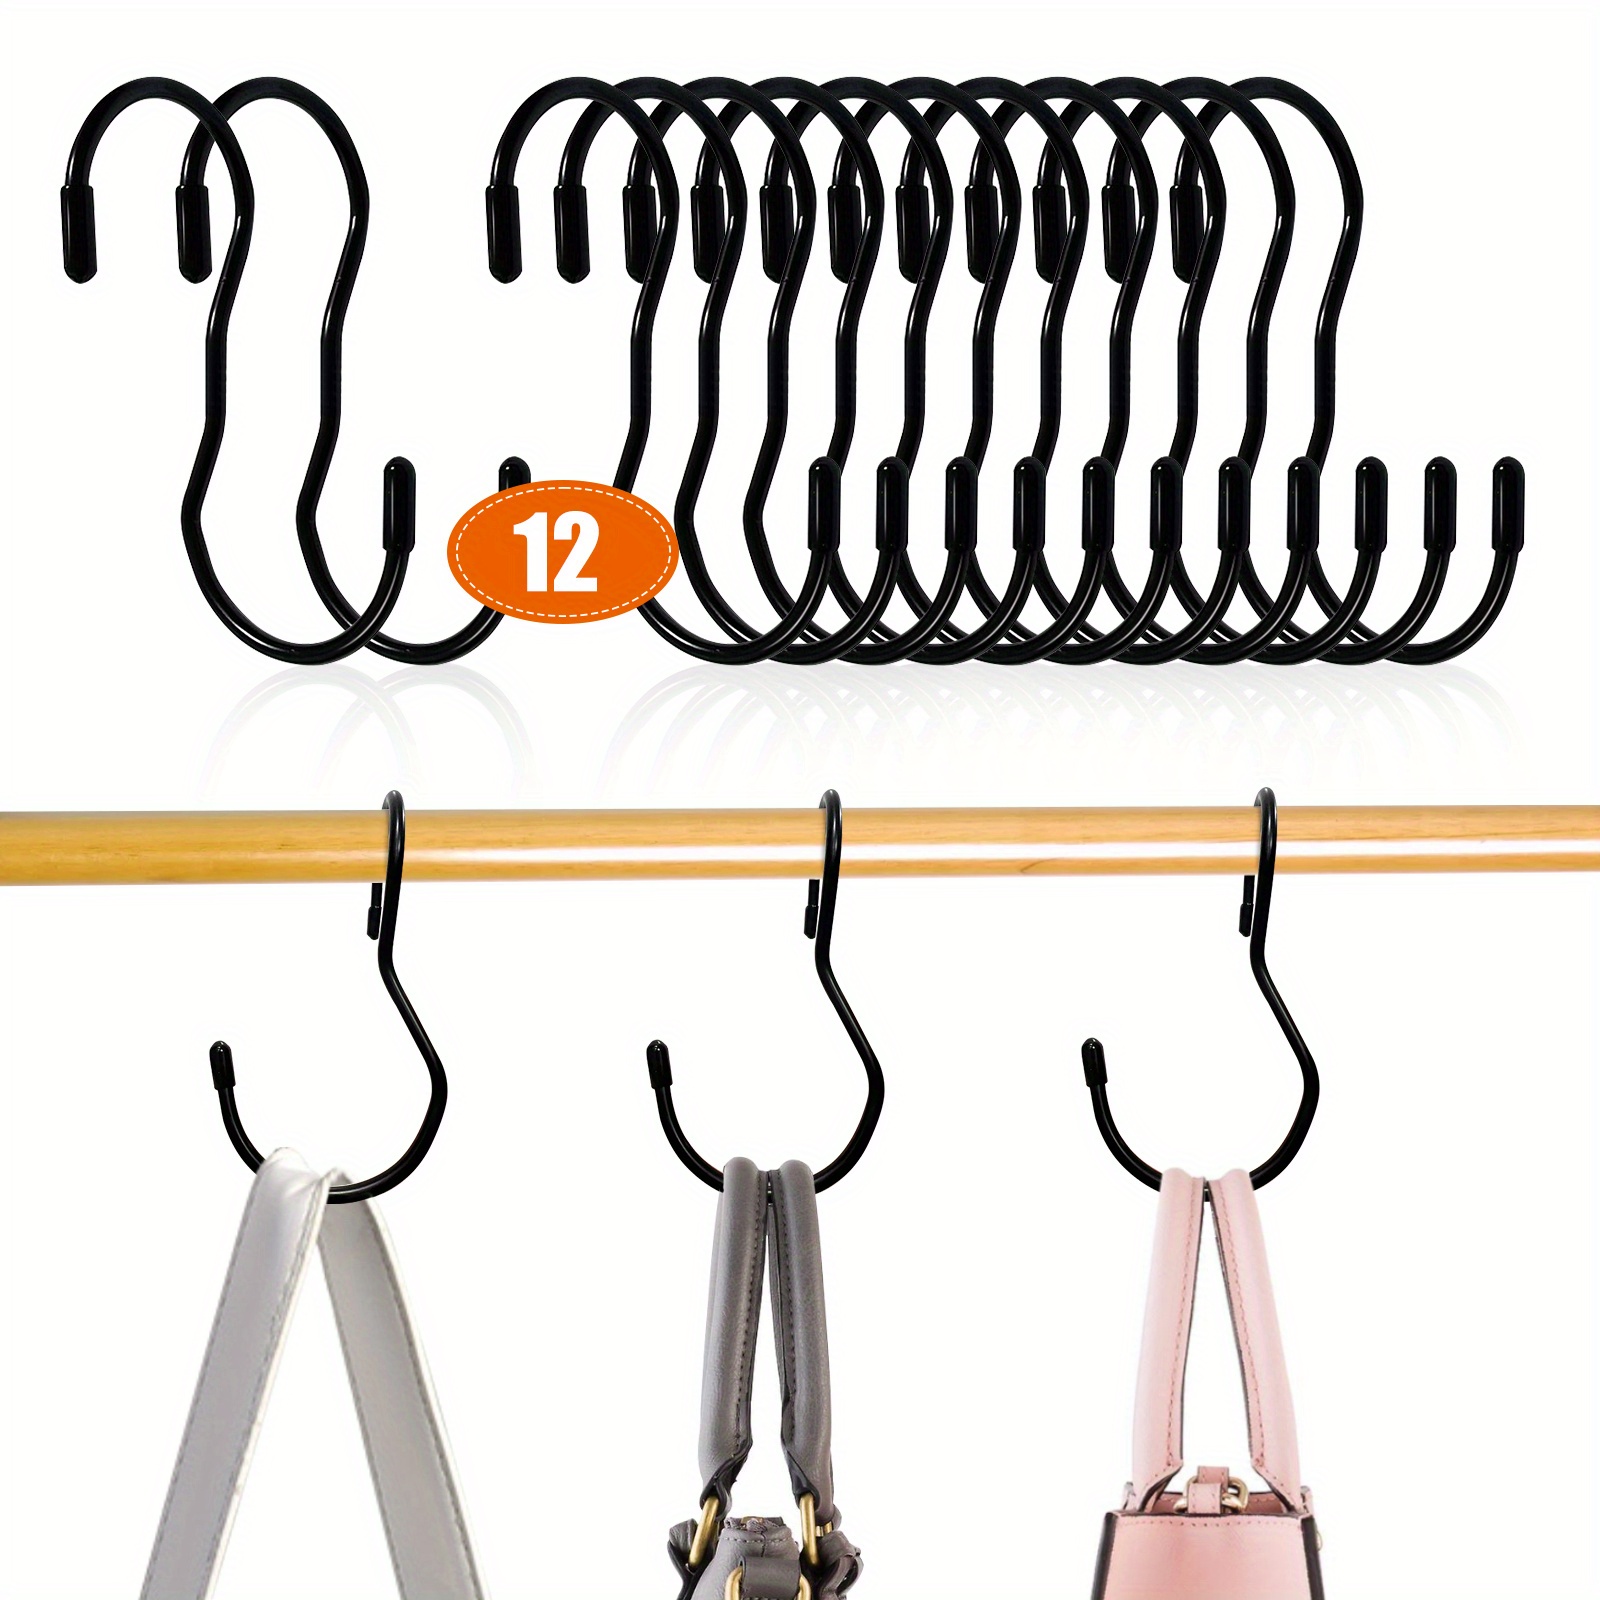  DINGEE 30 Pack S Hooks Heavy Duty,S Hooks for Hanging  Clothes,Black Metal S Shaped Hooks for Hanging Plants,Jeans Jewelry Purse  Pot Pan Cups Towels Bags Closet Rod 3.5 Inch S Hooks 